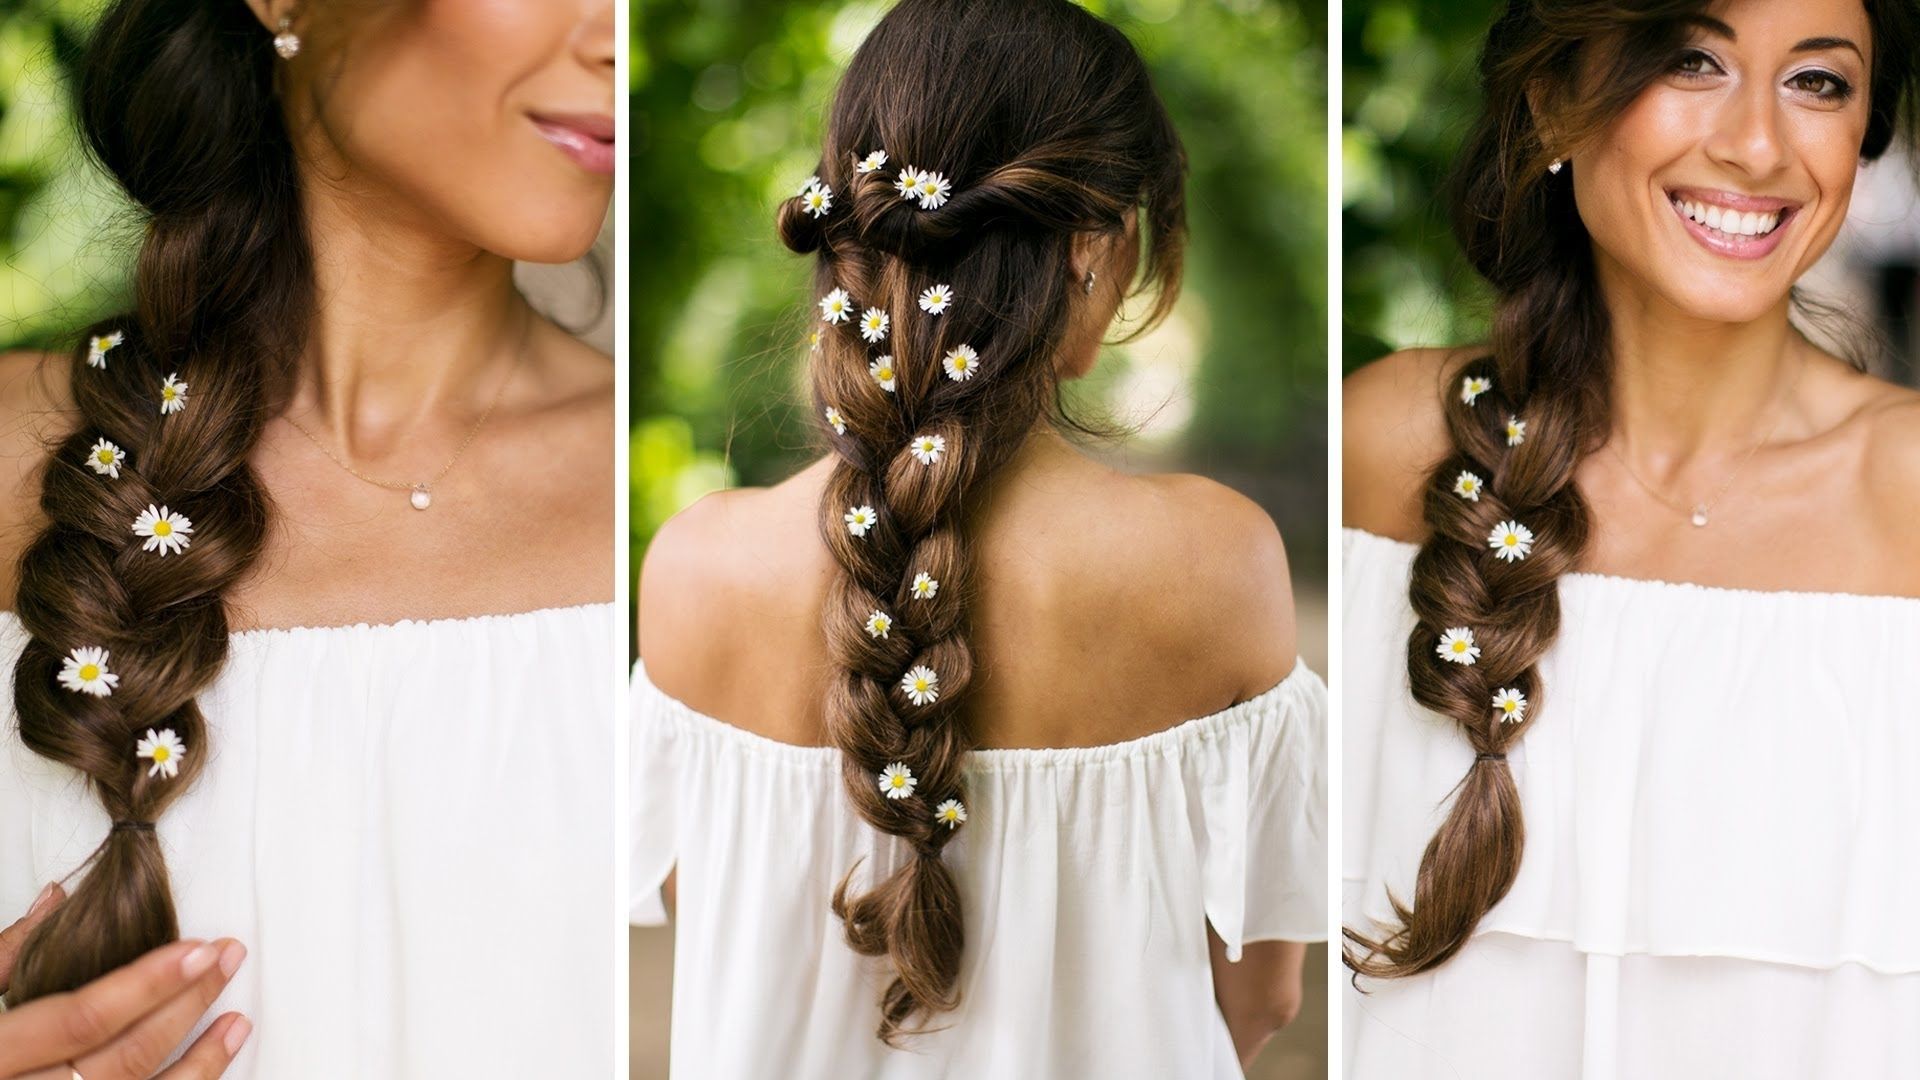 The Summer Braid Hair Tutorial – Youtube With Most Recent Braids And Flowers Hairstyles (View 5 of 15)